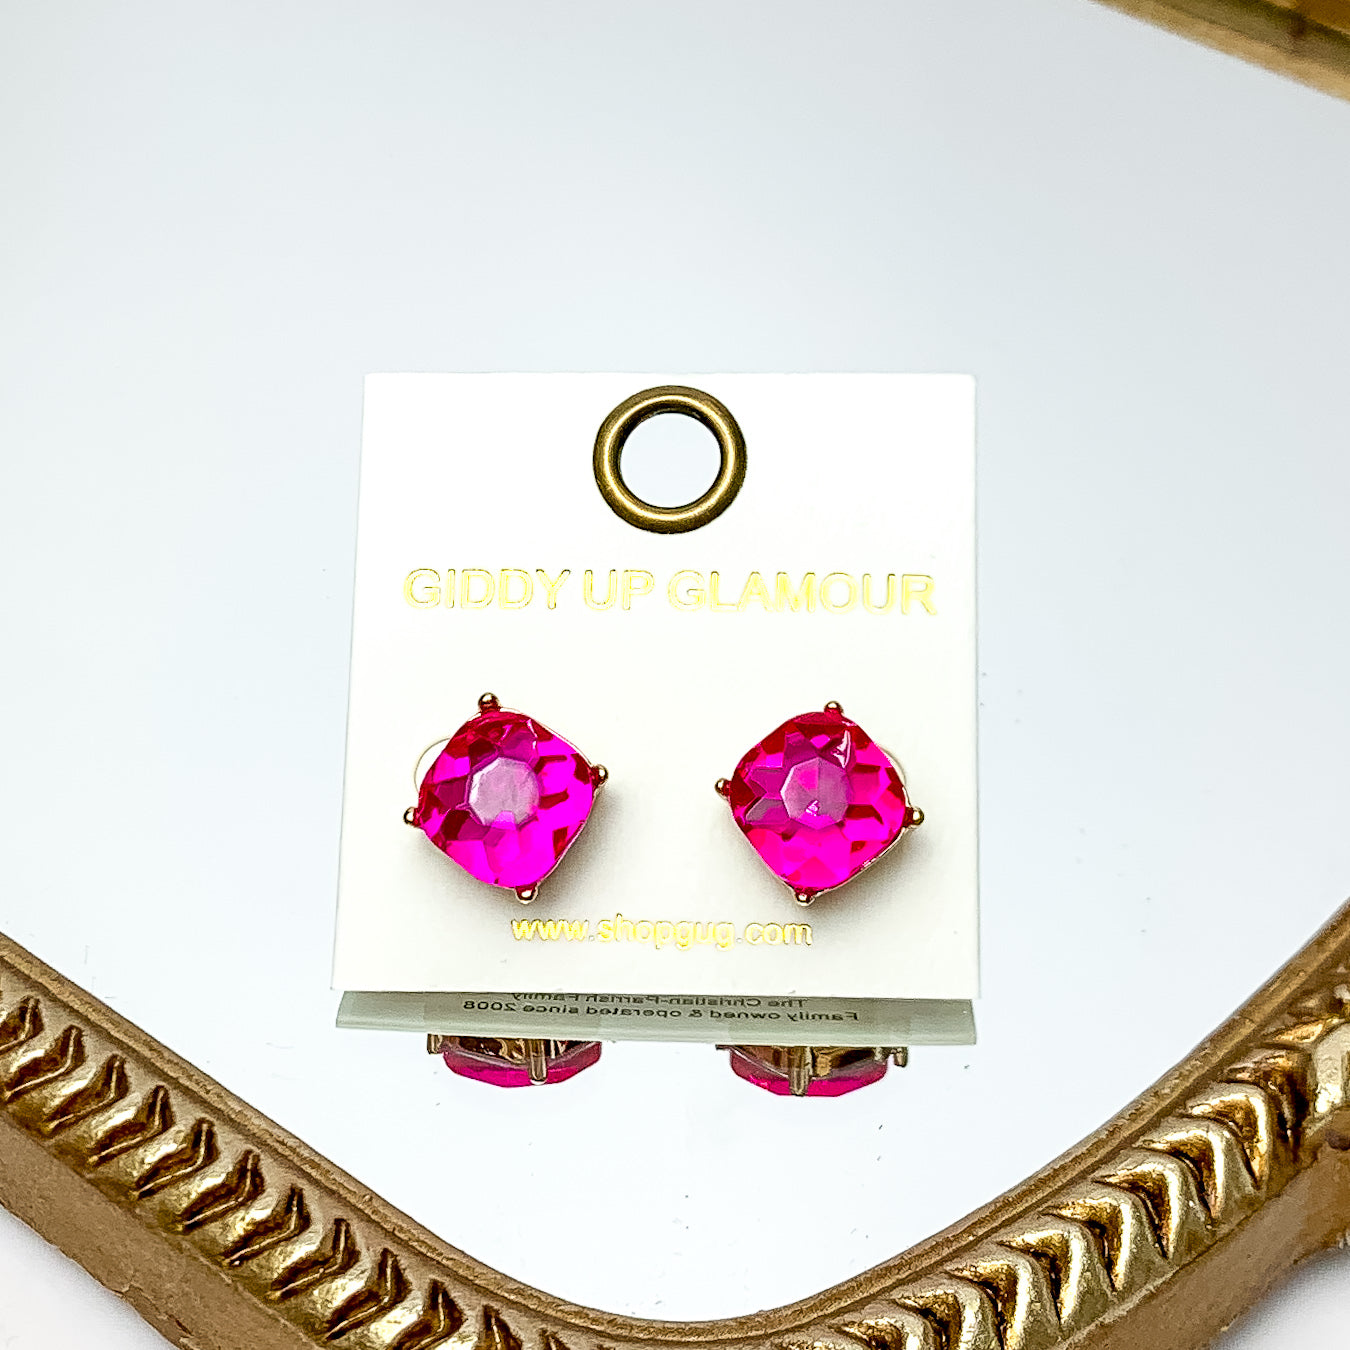 Large Crystal Stud Earrings in Hot Pink. These earrings are pictured laying on a gold trimmed mirror.